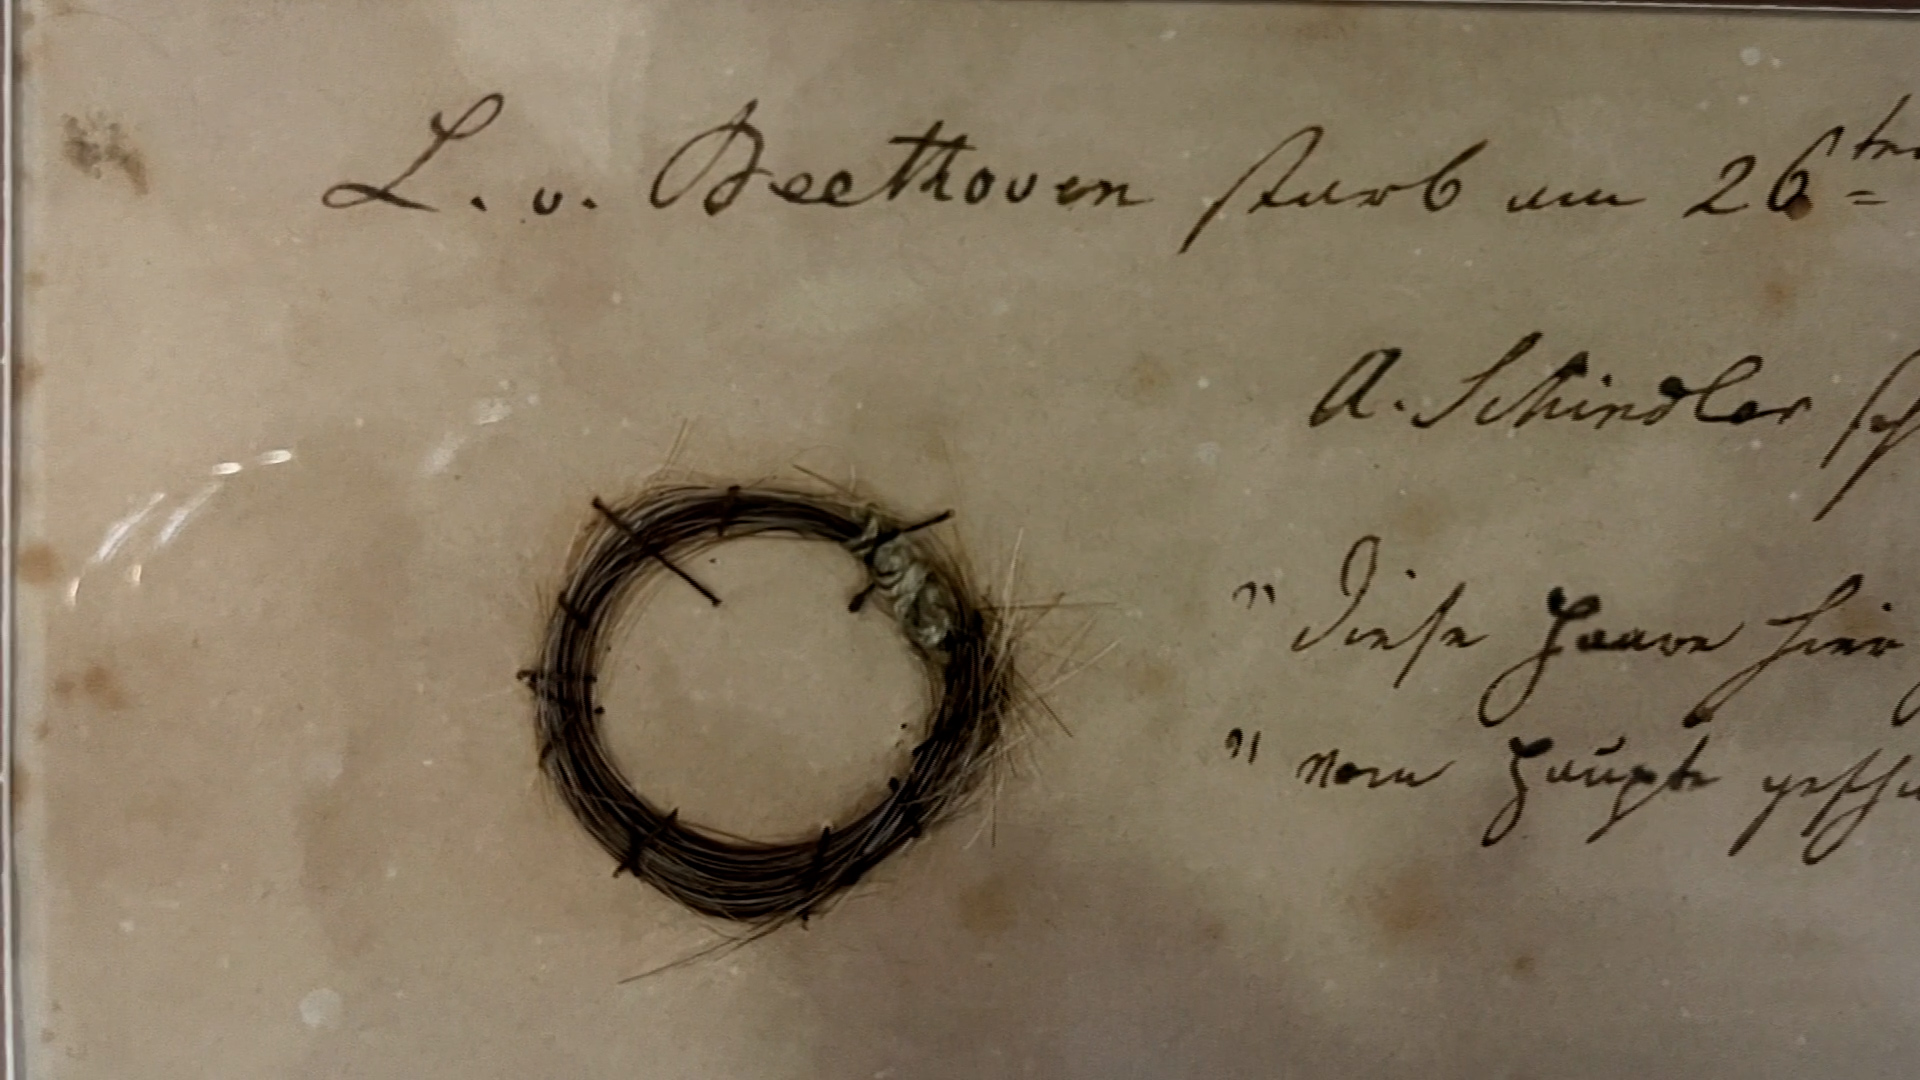 DNA From Beethoven’s Hair Tell Scientists About His Death